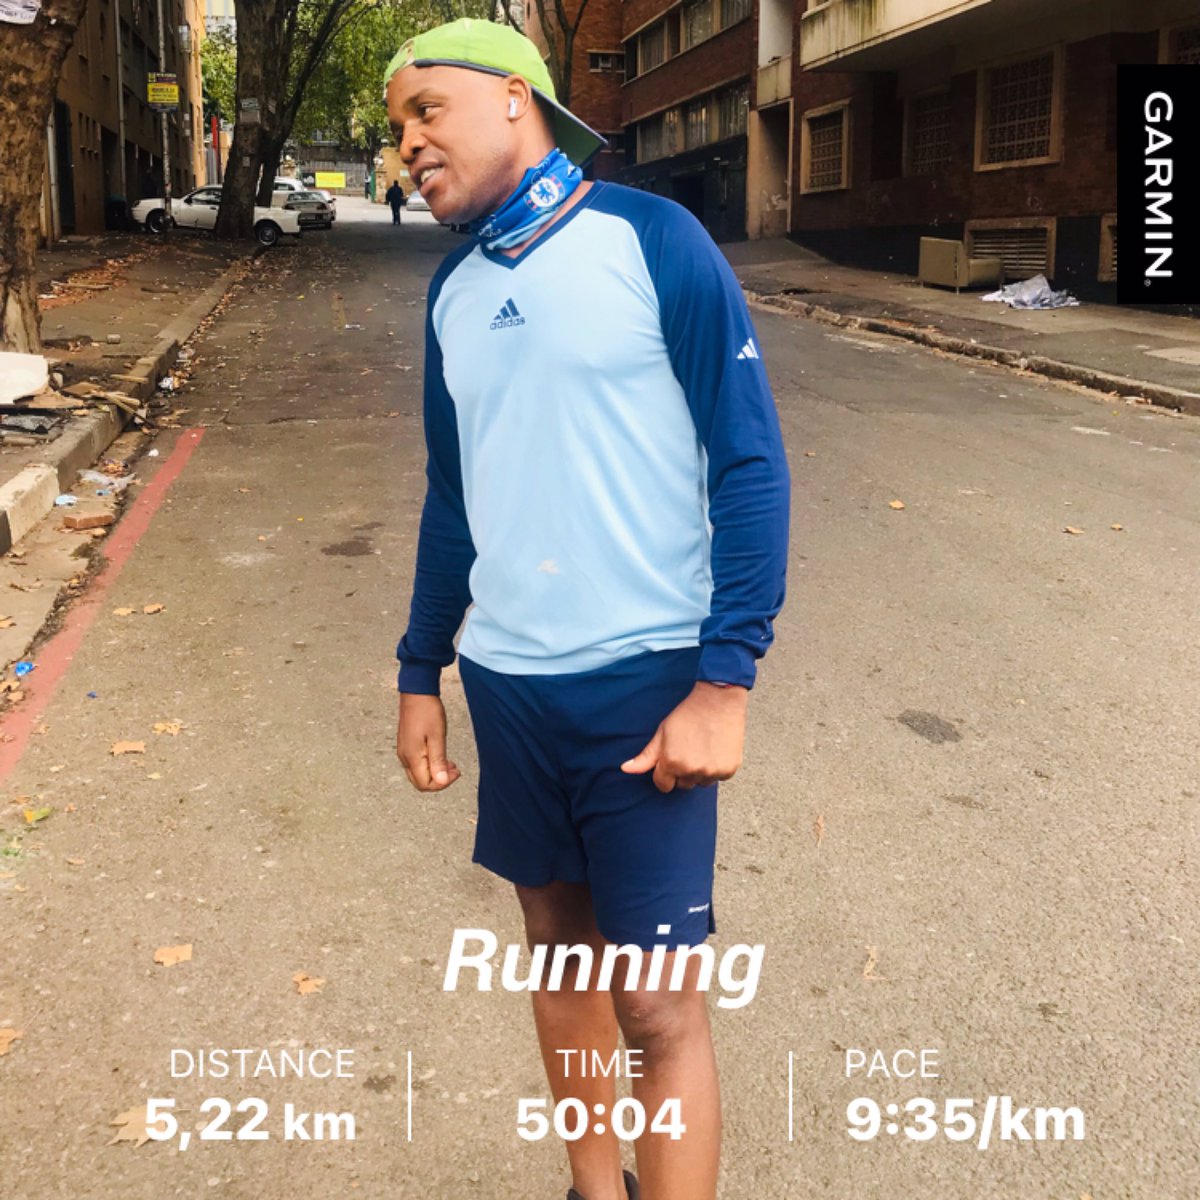 My heart is pumping sweet stuff today, Had a good time doing #IPaintedMyWalk - and #WalkingWithTumiSole 
#RunningWithTumiSole 
#RunningWithLulubel 
#IPaintedMyRun 
#FetchYourBody2022 
#HomeofRunning